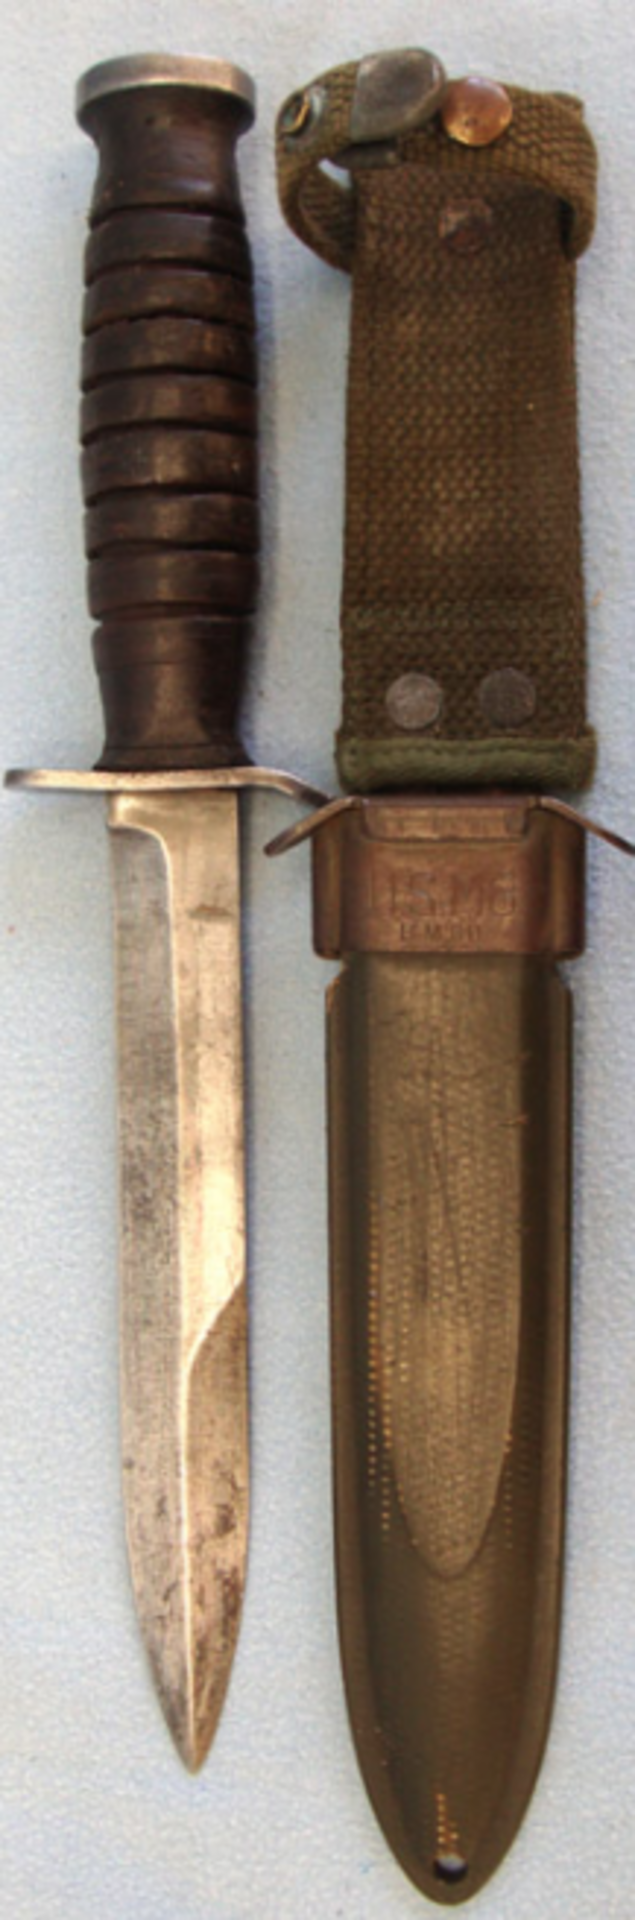 WW2 U.S. Marines, Early M3 Figthing Knife By Utica In Early M8 Scabbard